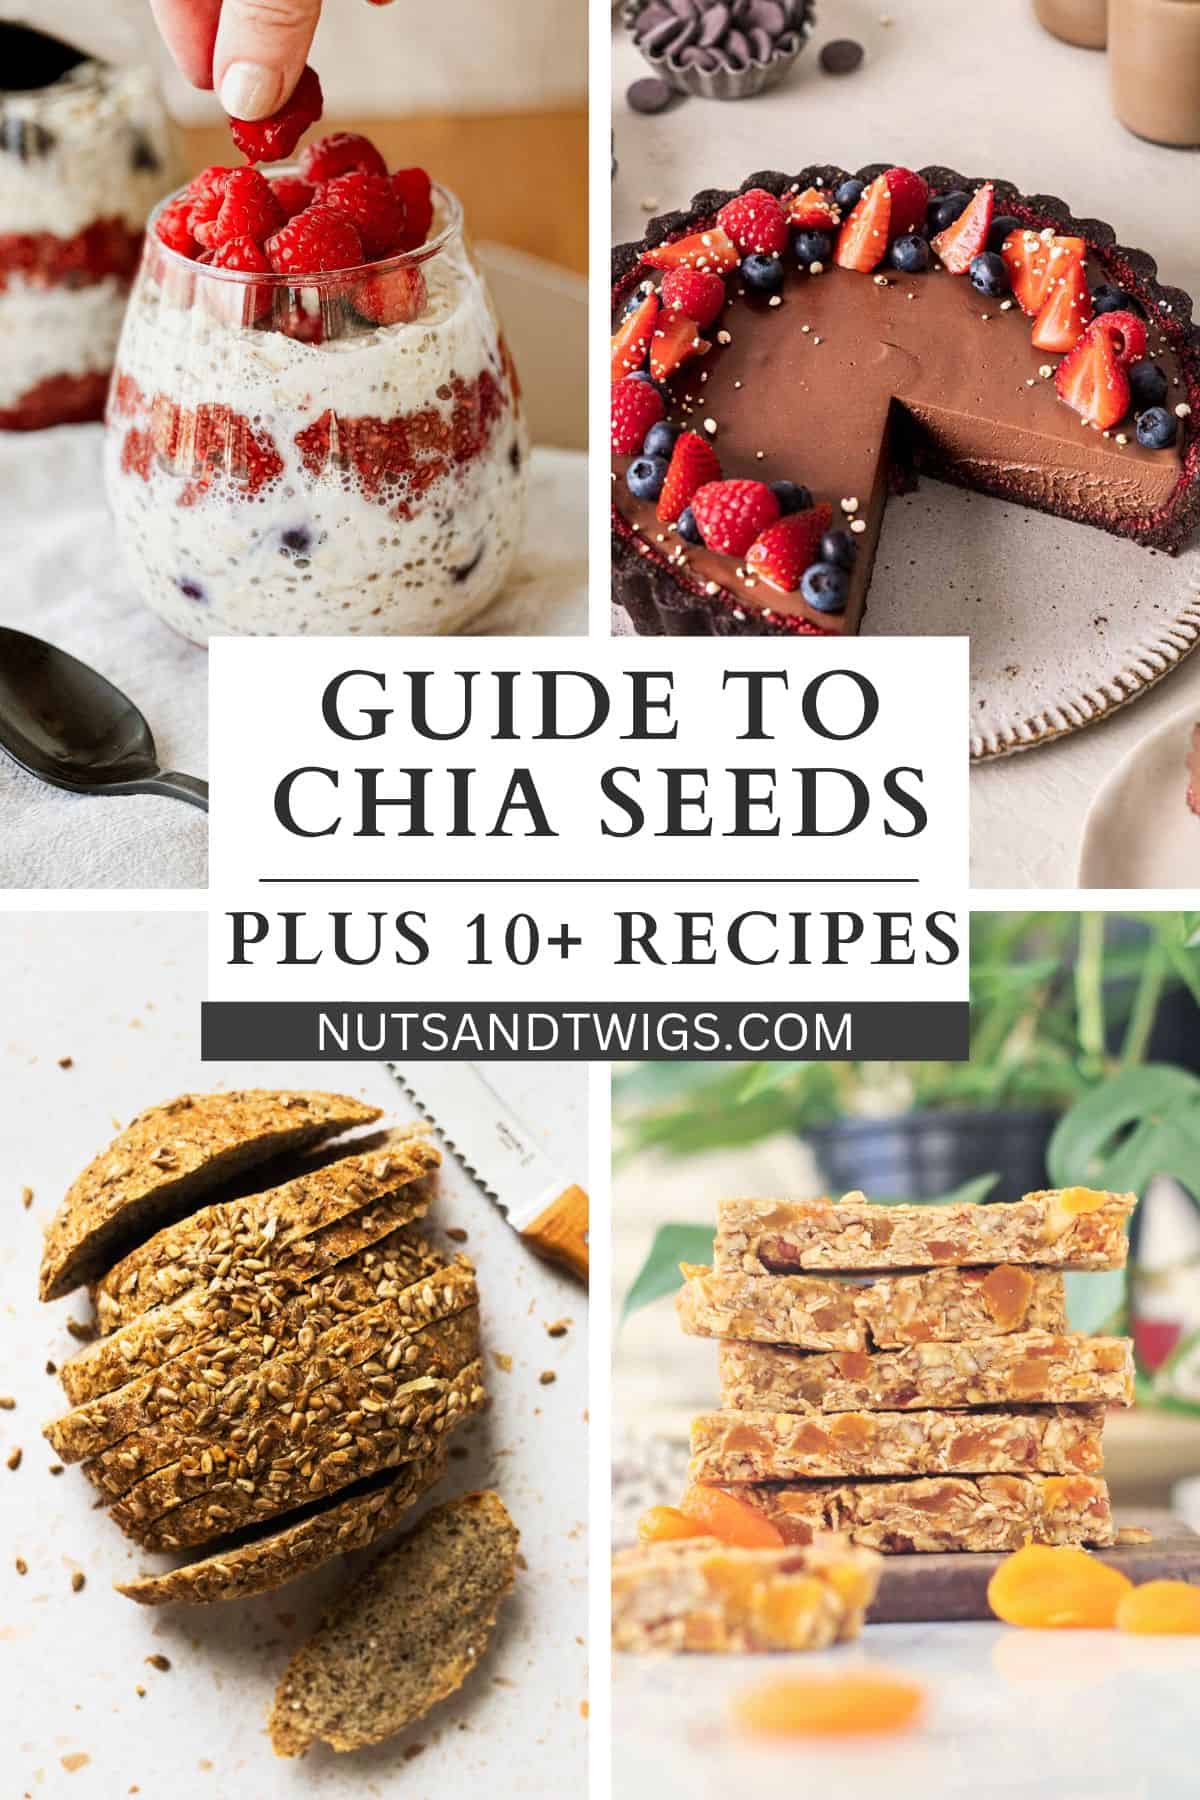 poster of 4 different recipes that contain chia seeds with a label in the middle - Guide to Chia Seeds and 10 plus recipes